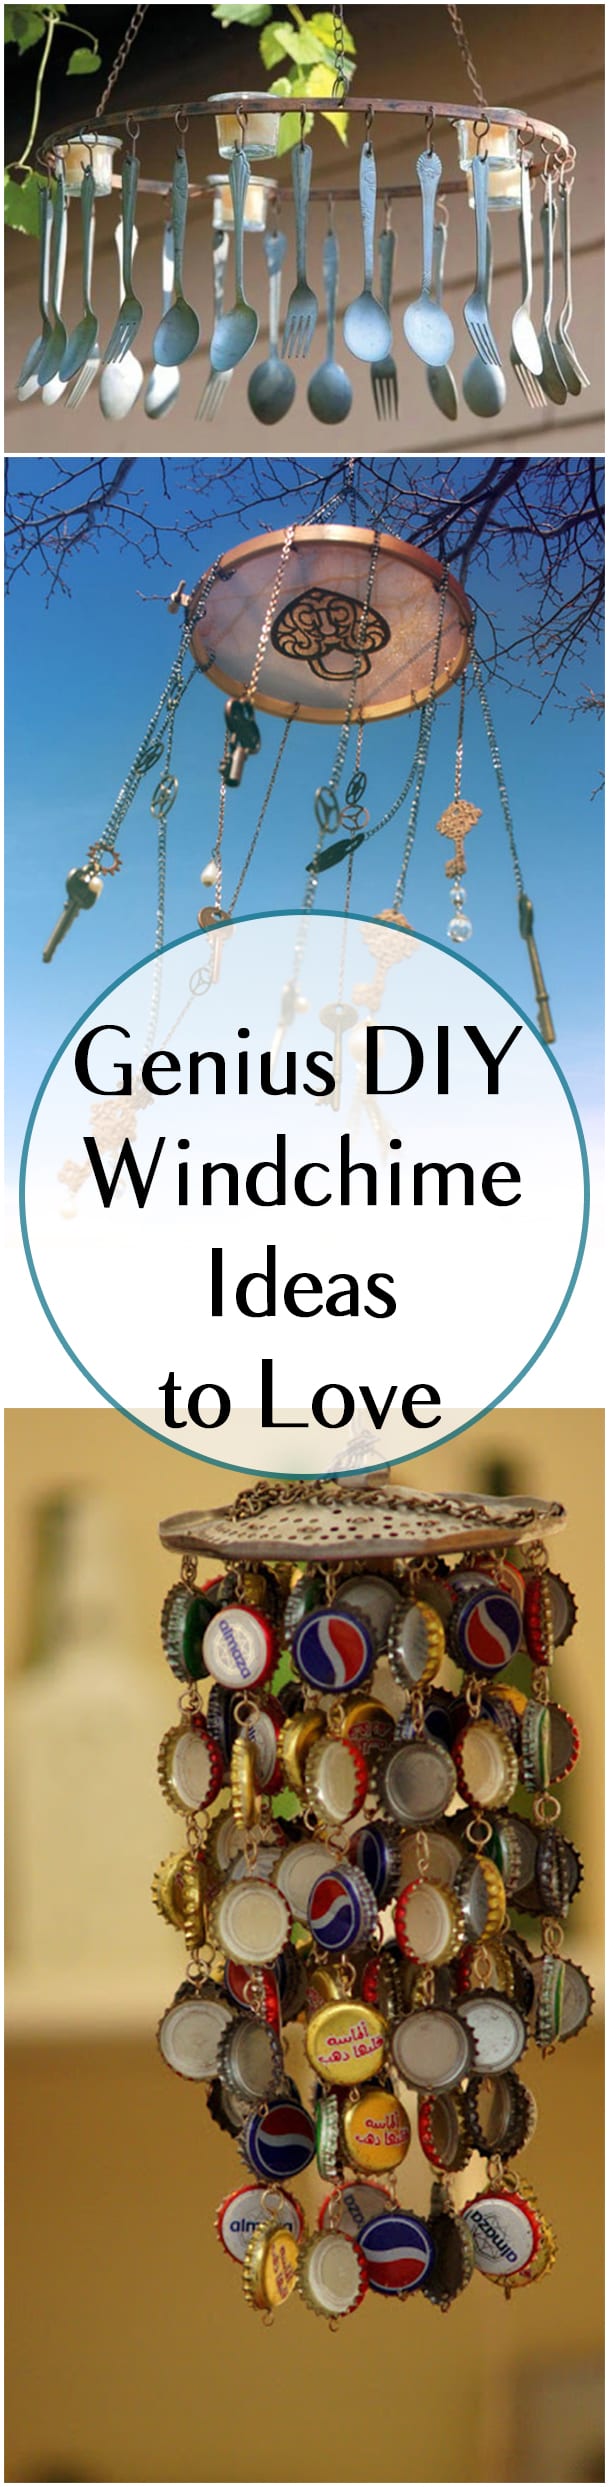 DIY wind chime, wind chime ideas, wind chime, porch projects, popular pin, DIY porch projects, porch decor, curb appeal projects, easy curb appeal project.